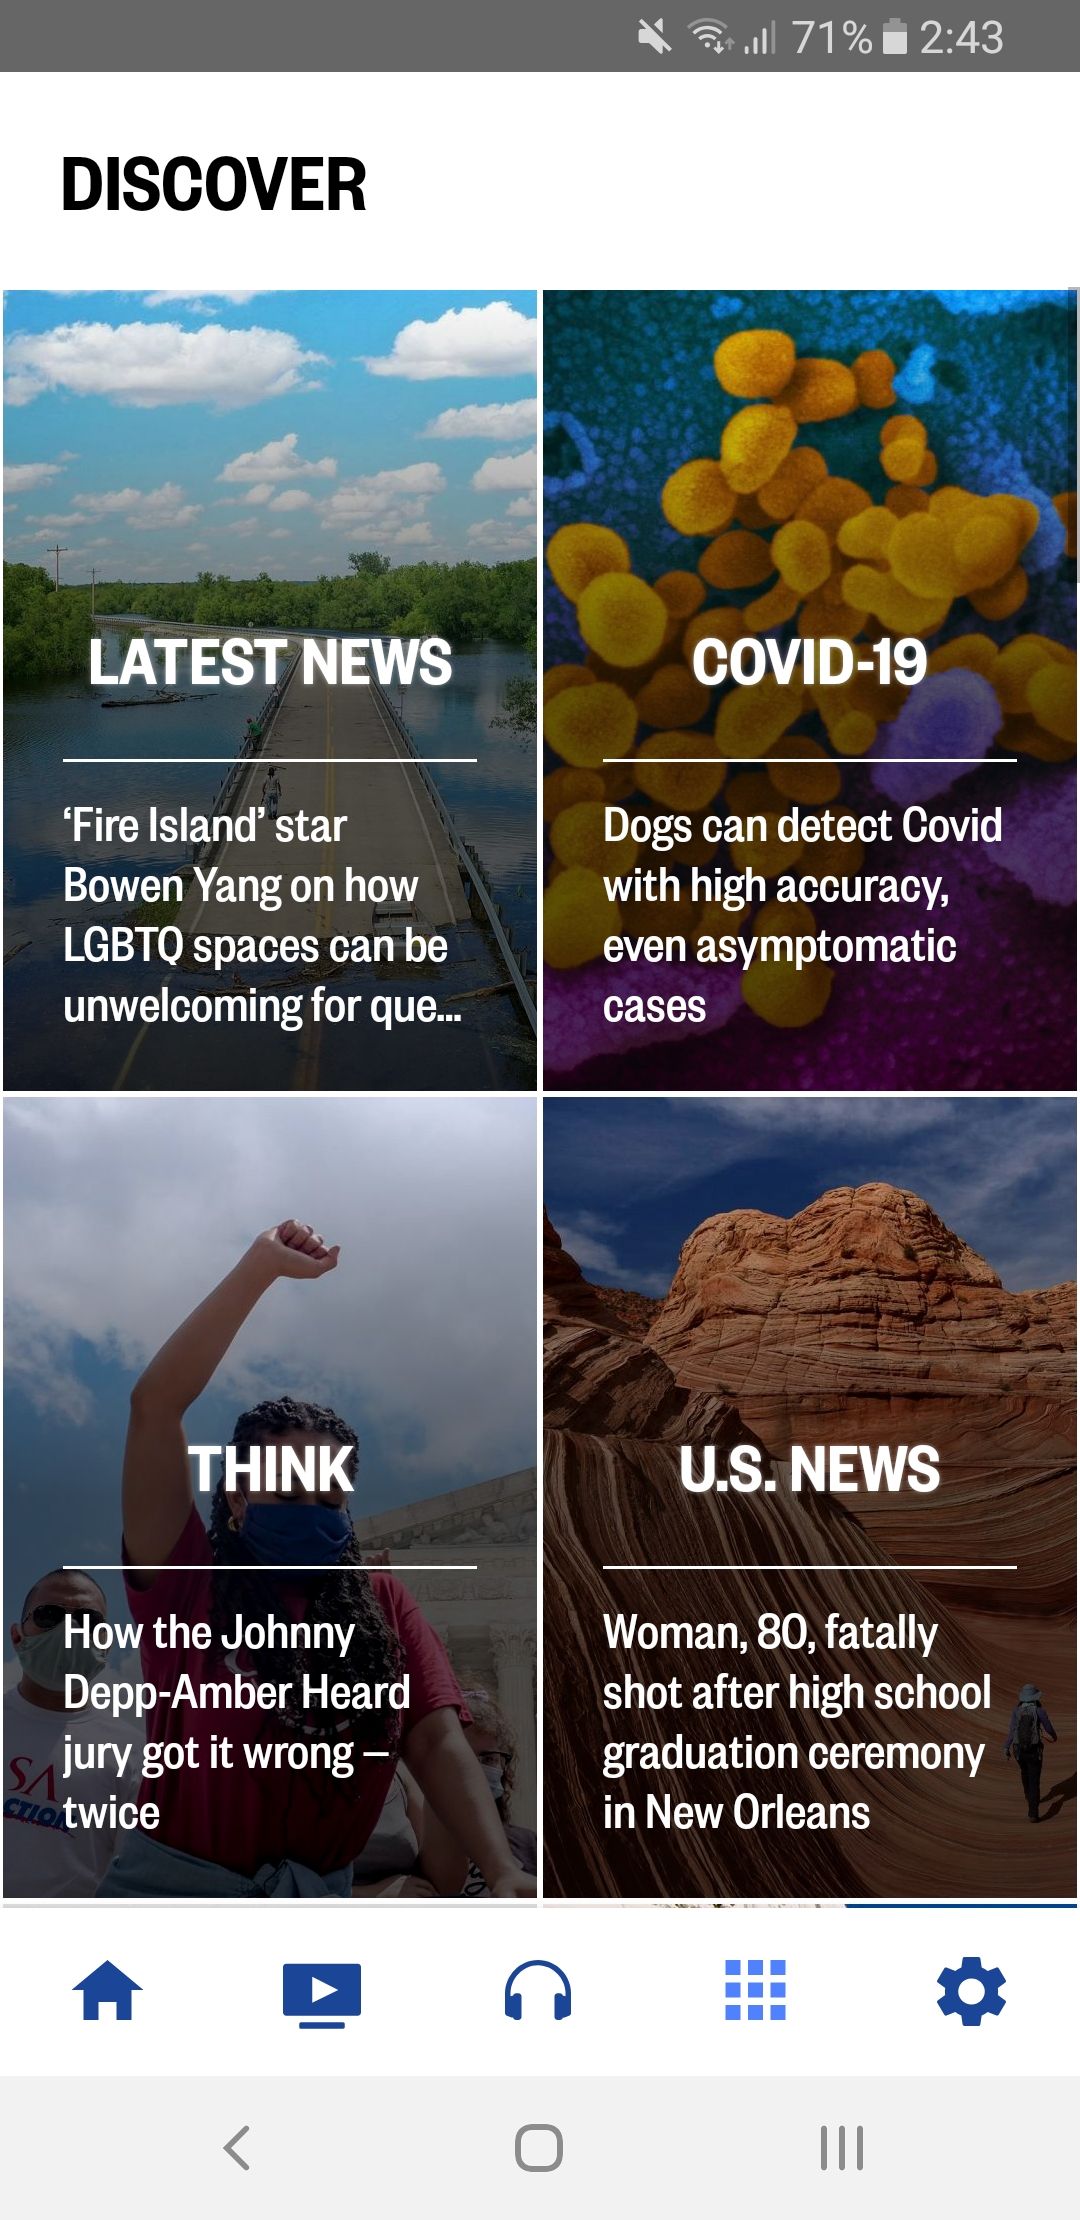 NBC News Discover screen in app